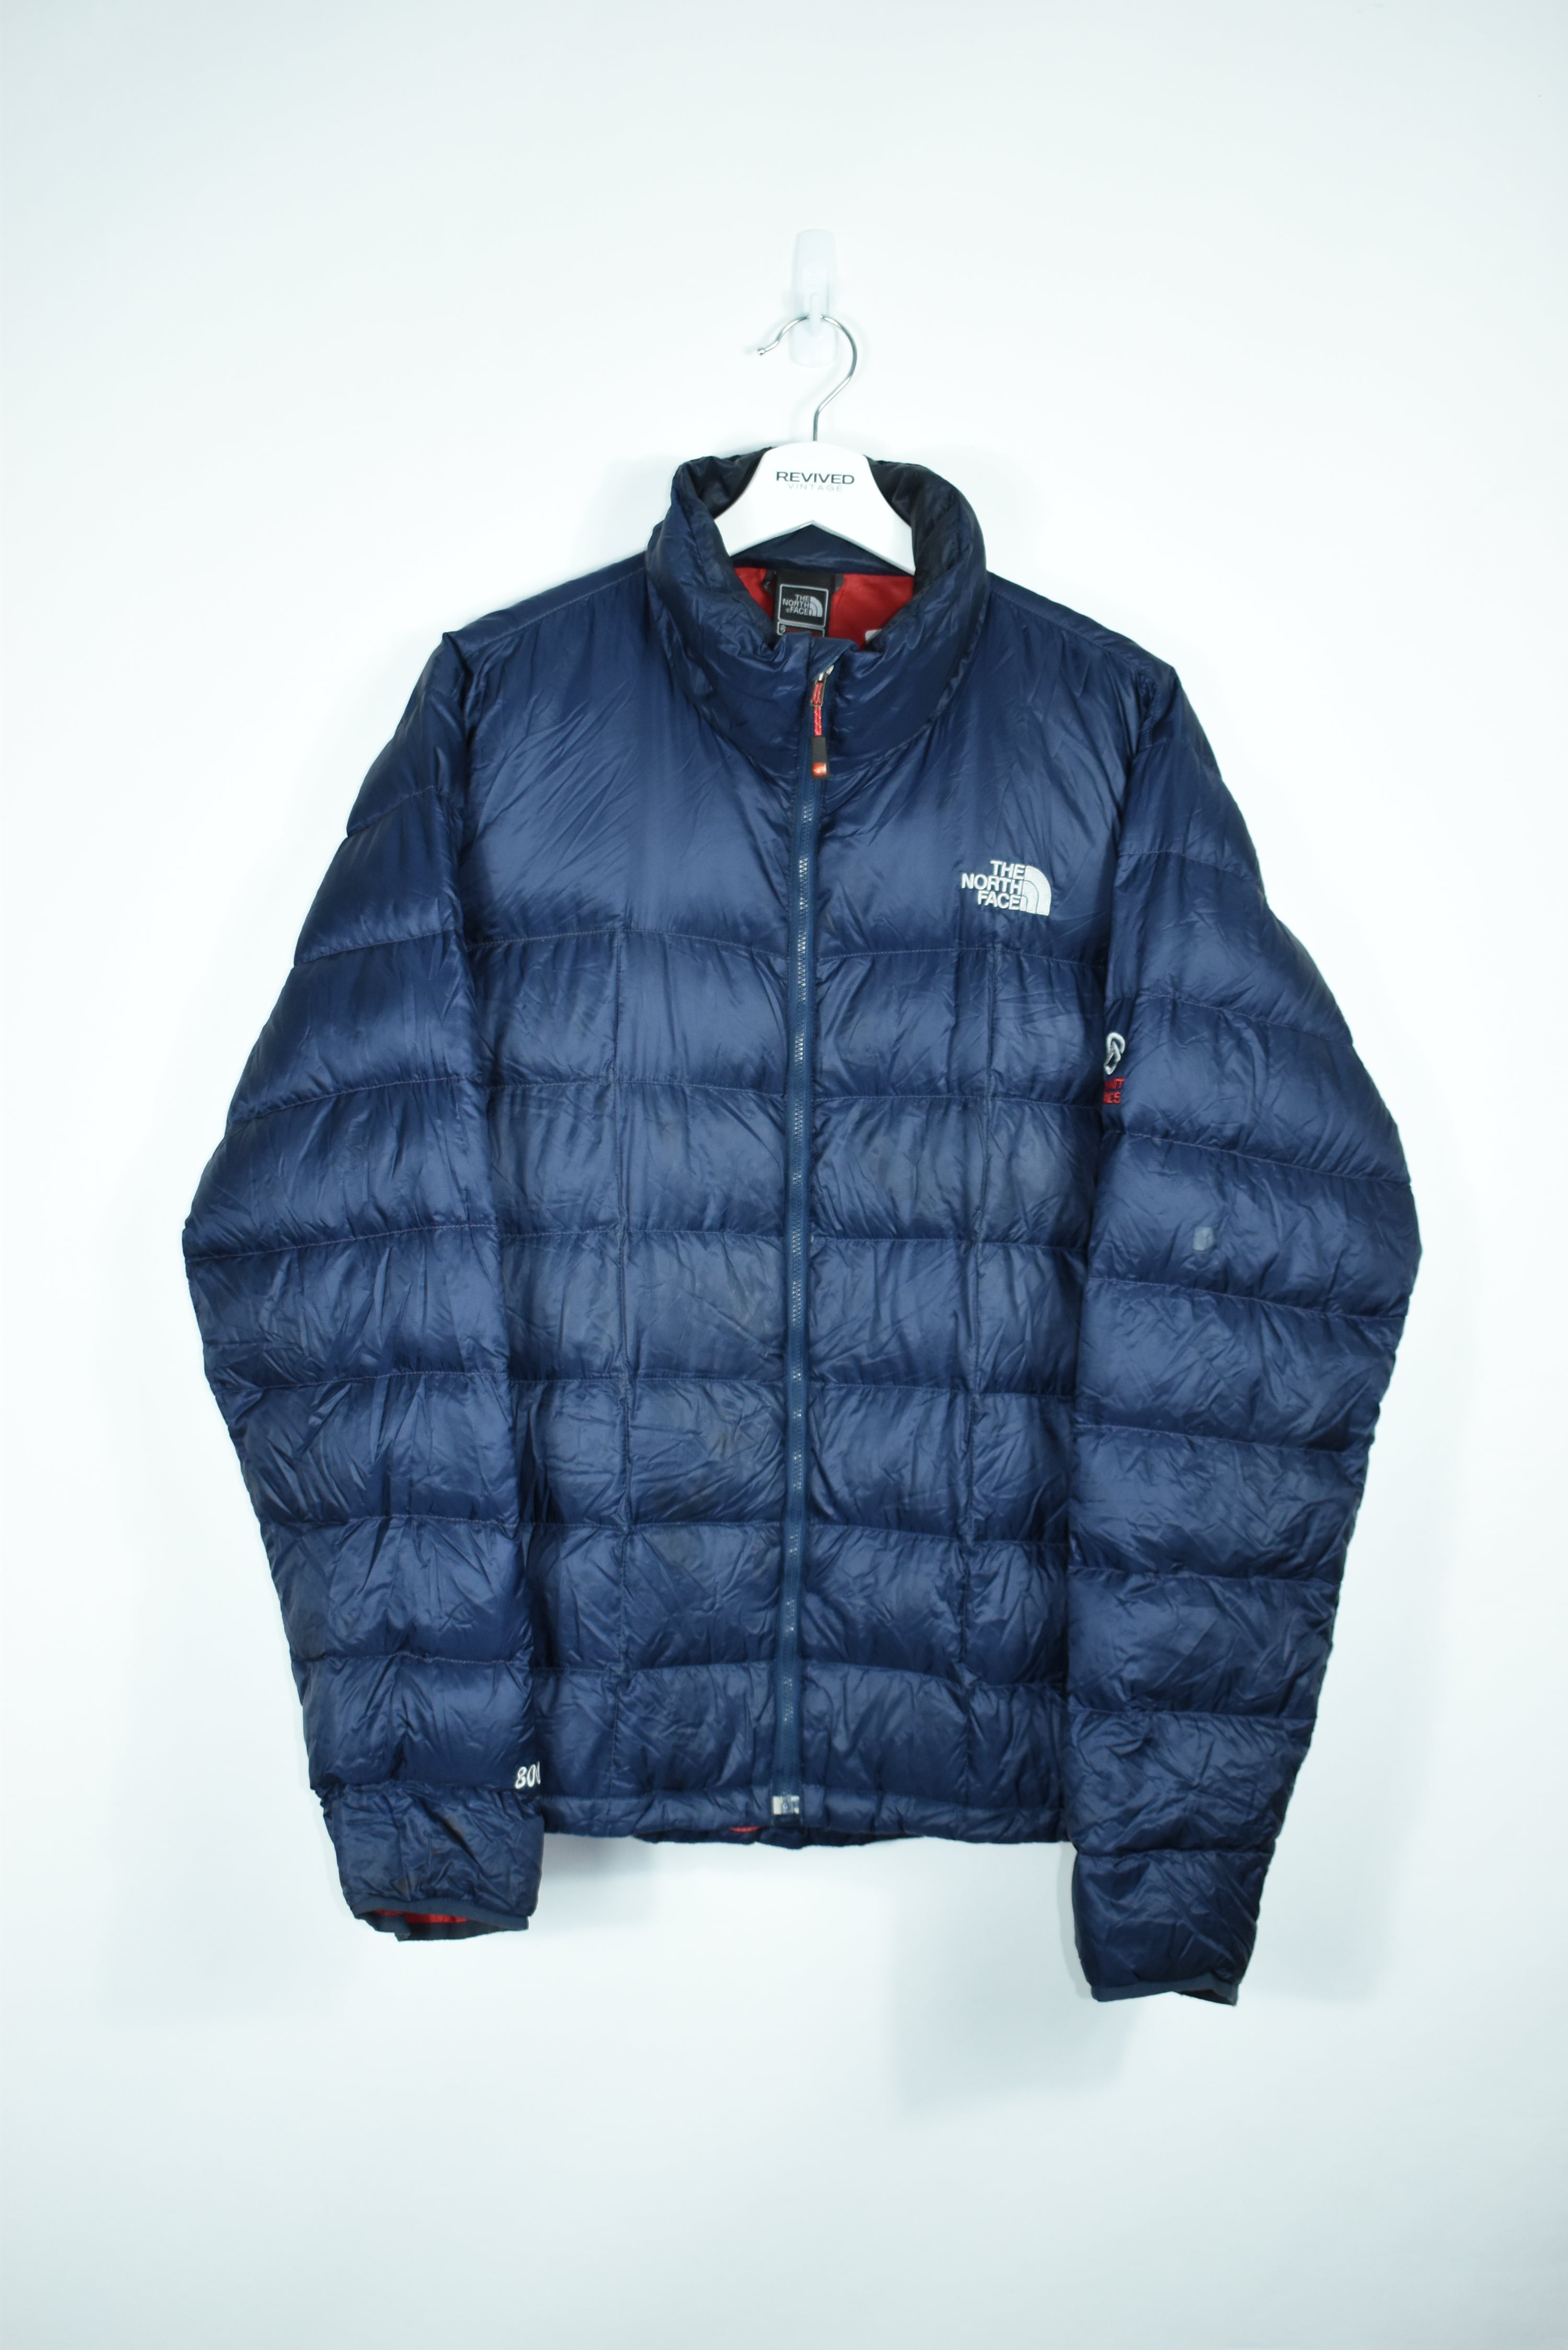 Vintage North Face Navy Puffer 800 Sumit Series LARGE /XL